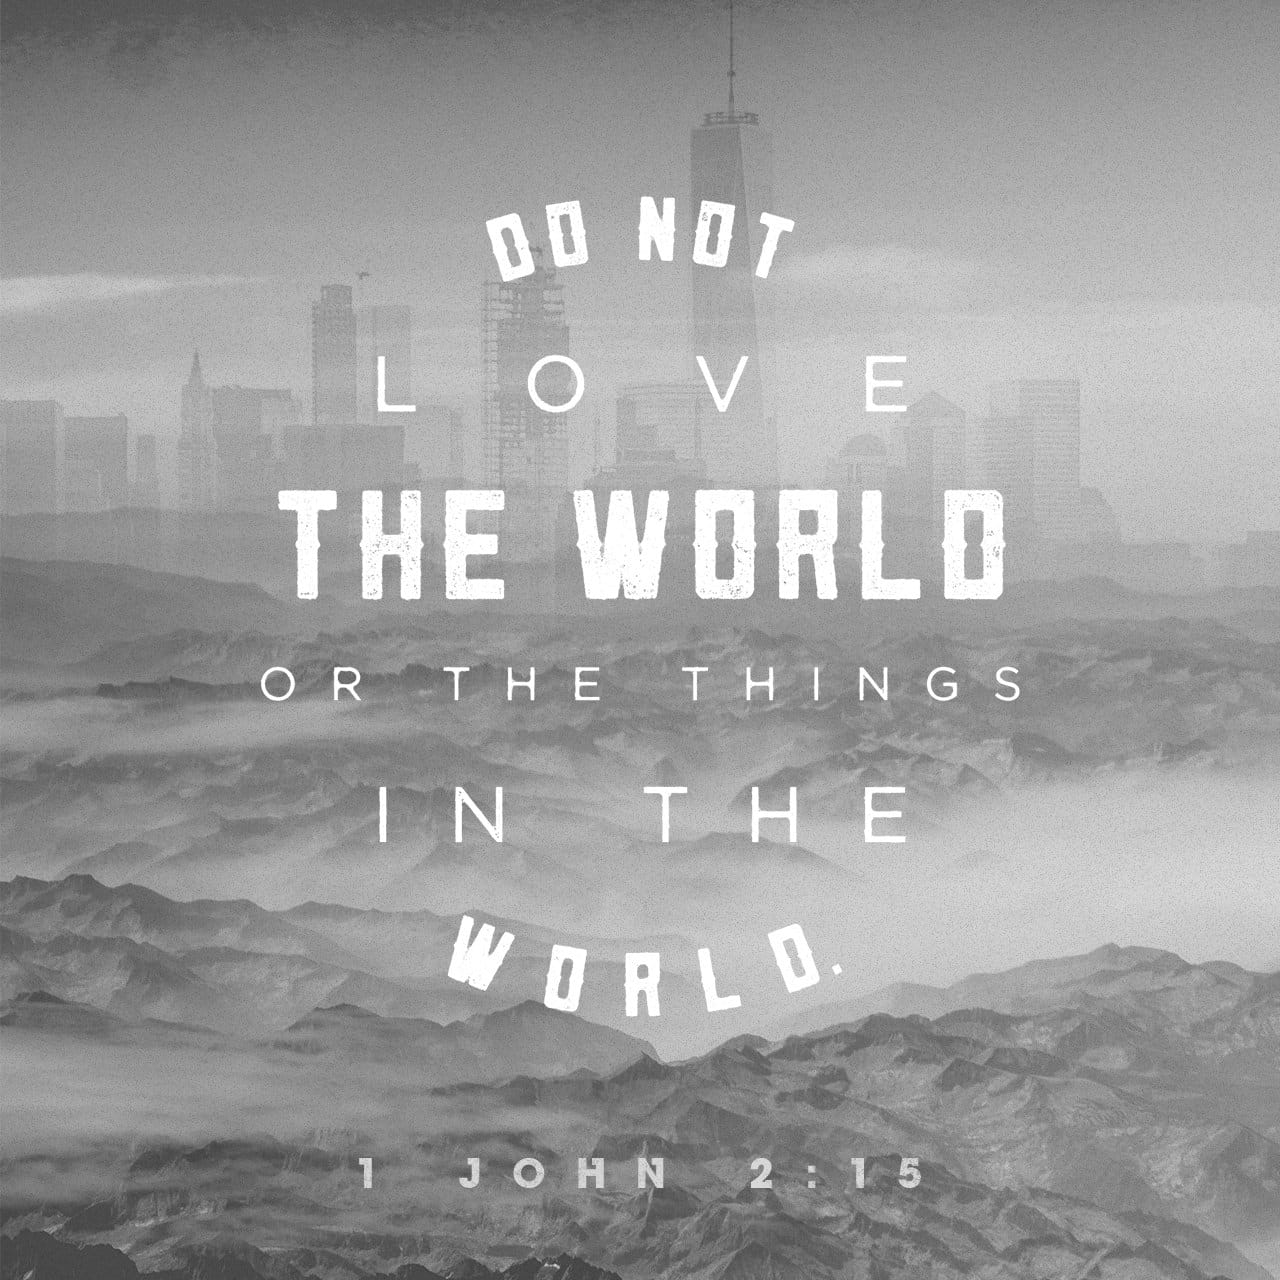 VOTD April 3 - “Do not love the world nor the things in the world. If anyone loves the world, the love of the Father is not in him.” ‭‭1 John‬ ‭2:15‬ ‭NASB‬‬